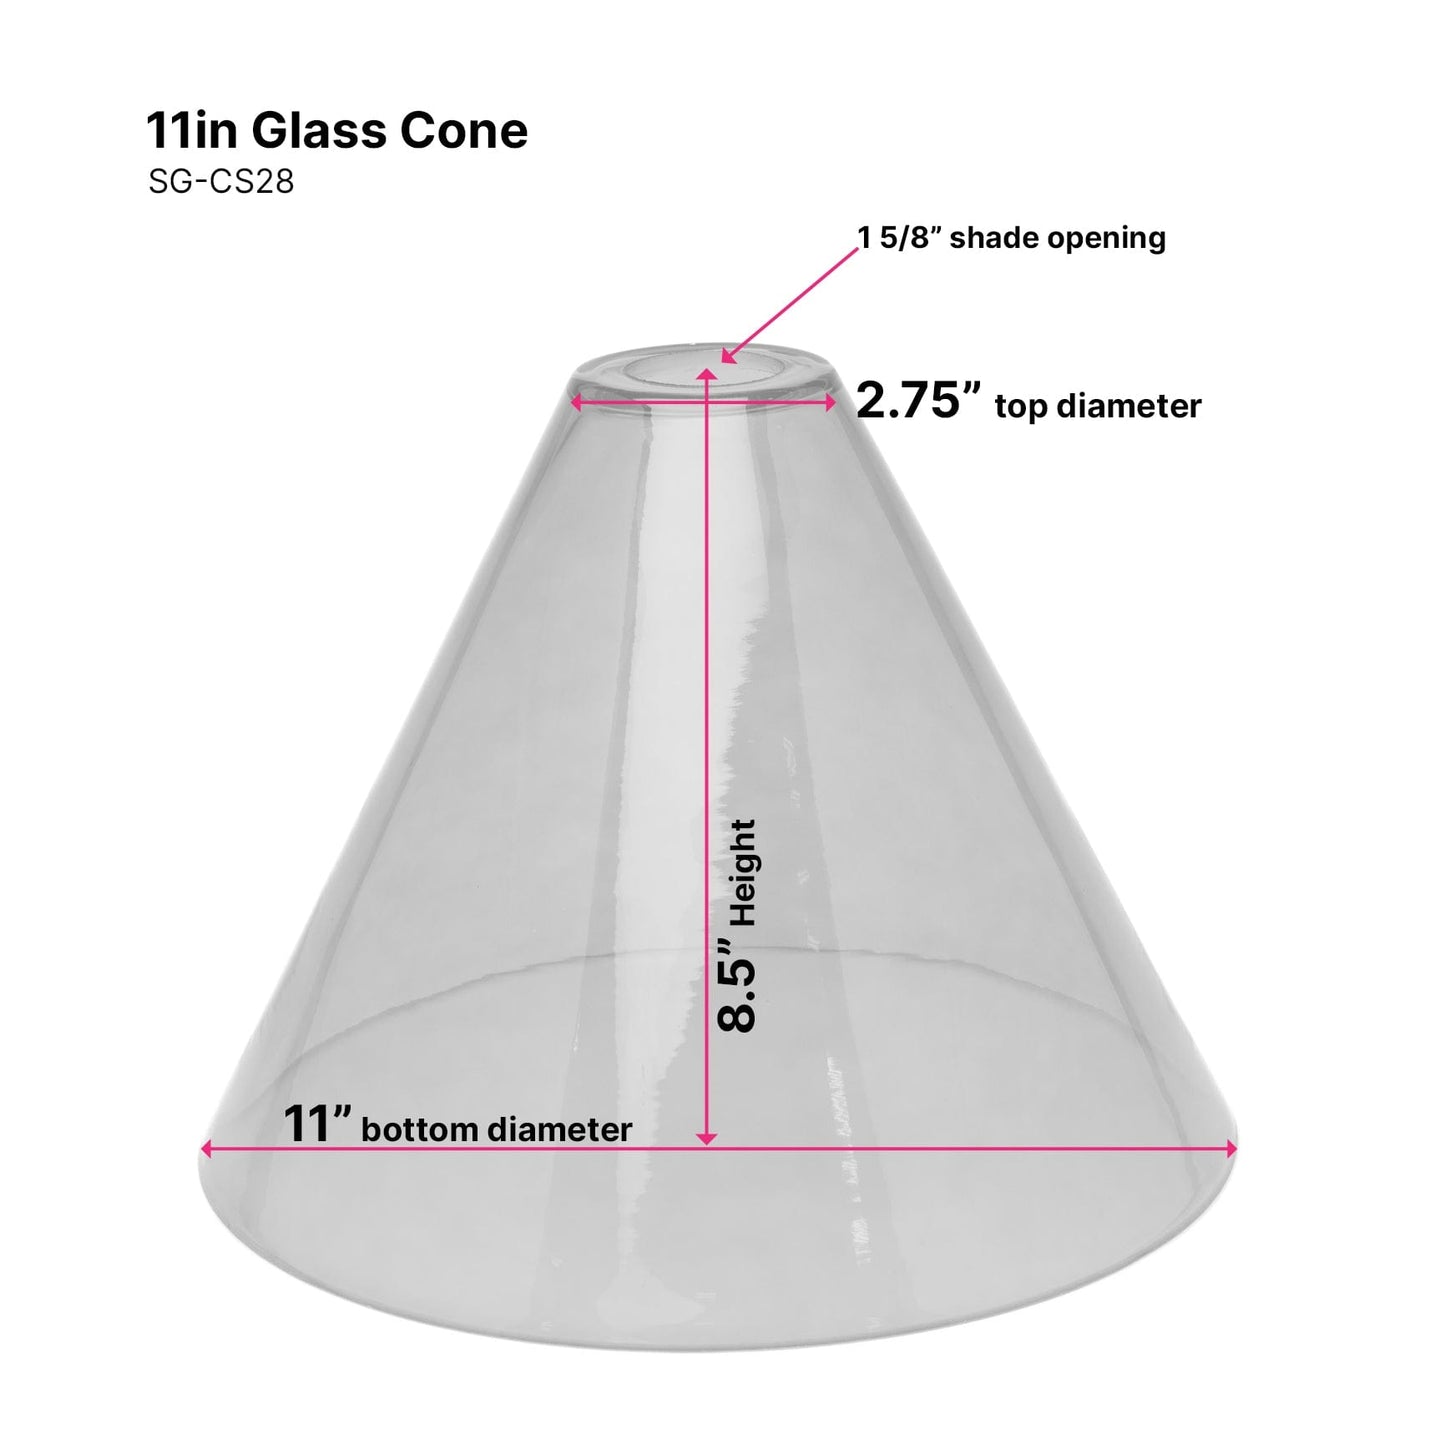 11in Glass Cone - Shade Ready